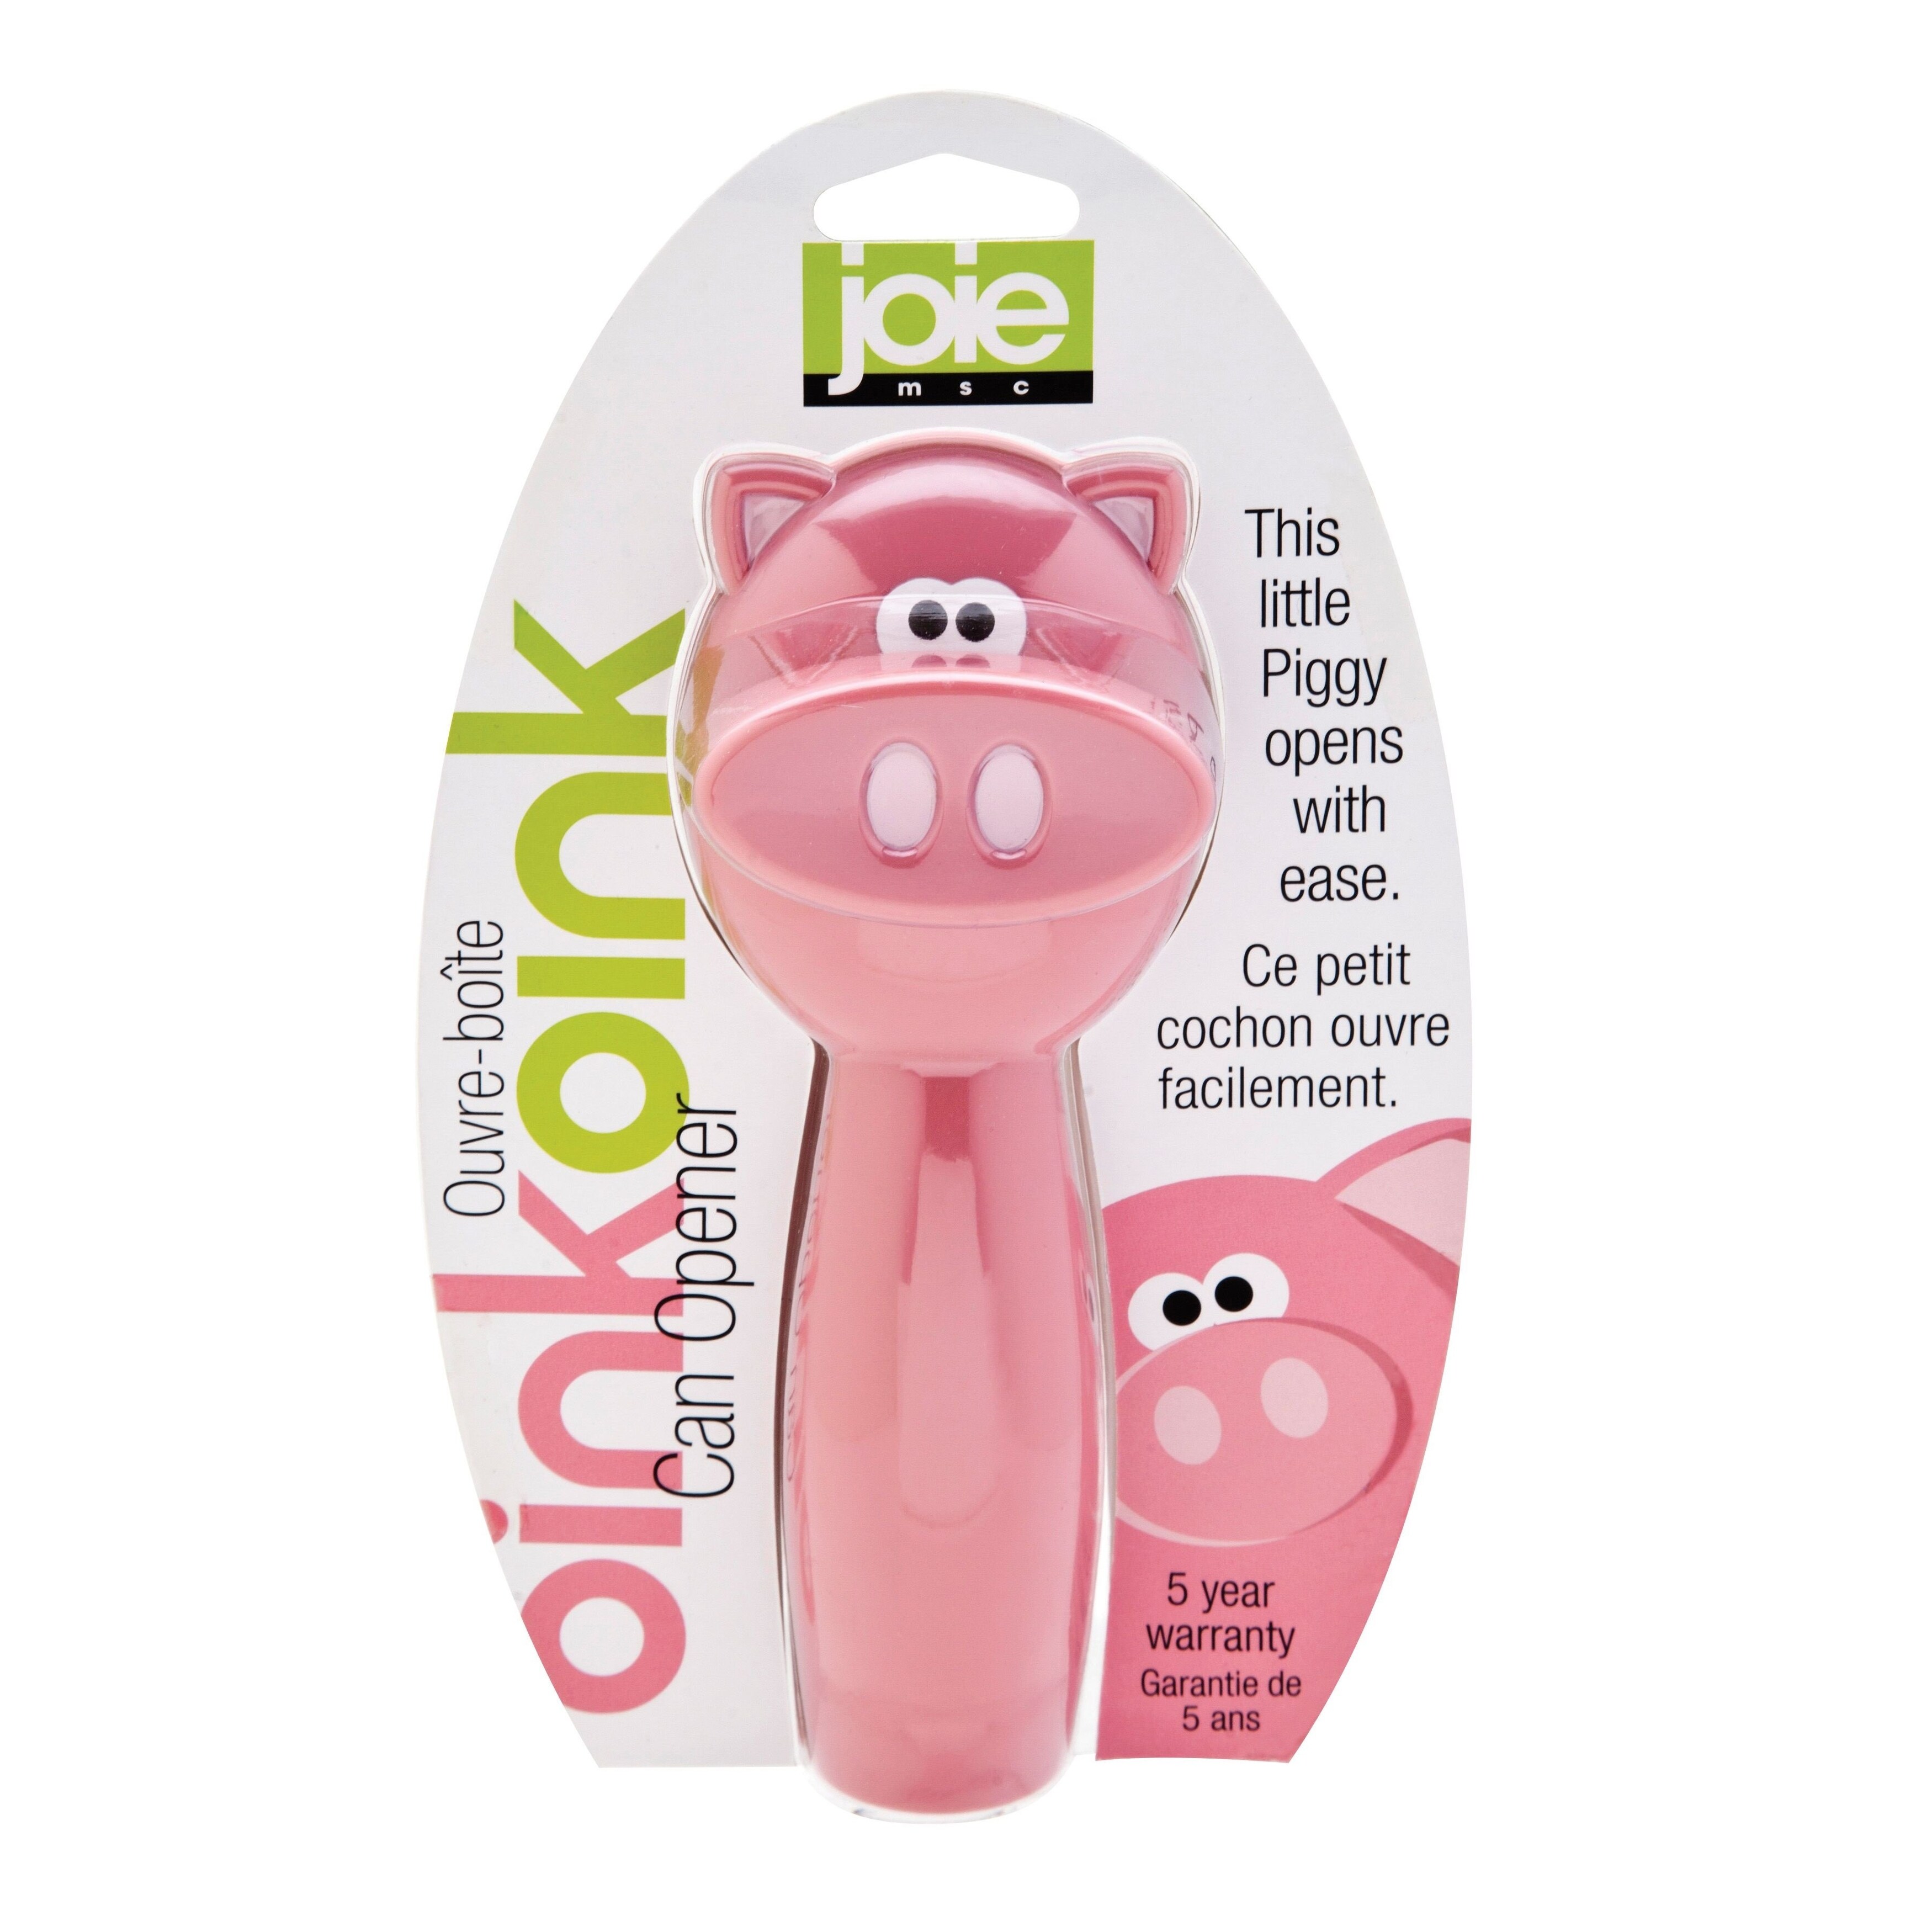 https://ak1.ostkcdn.com/images/products/is/images/direct/a60ede0eccce0c6fd4c694af82a96488658ffbda/Joie-Oink-Oink-Piggy-Themed-Manual-Safety-Lid-Can-Opener.jpg